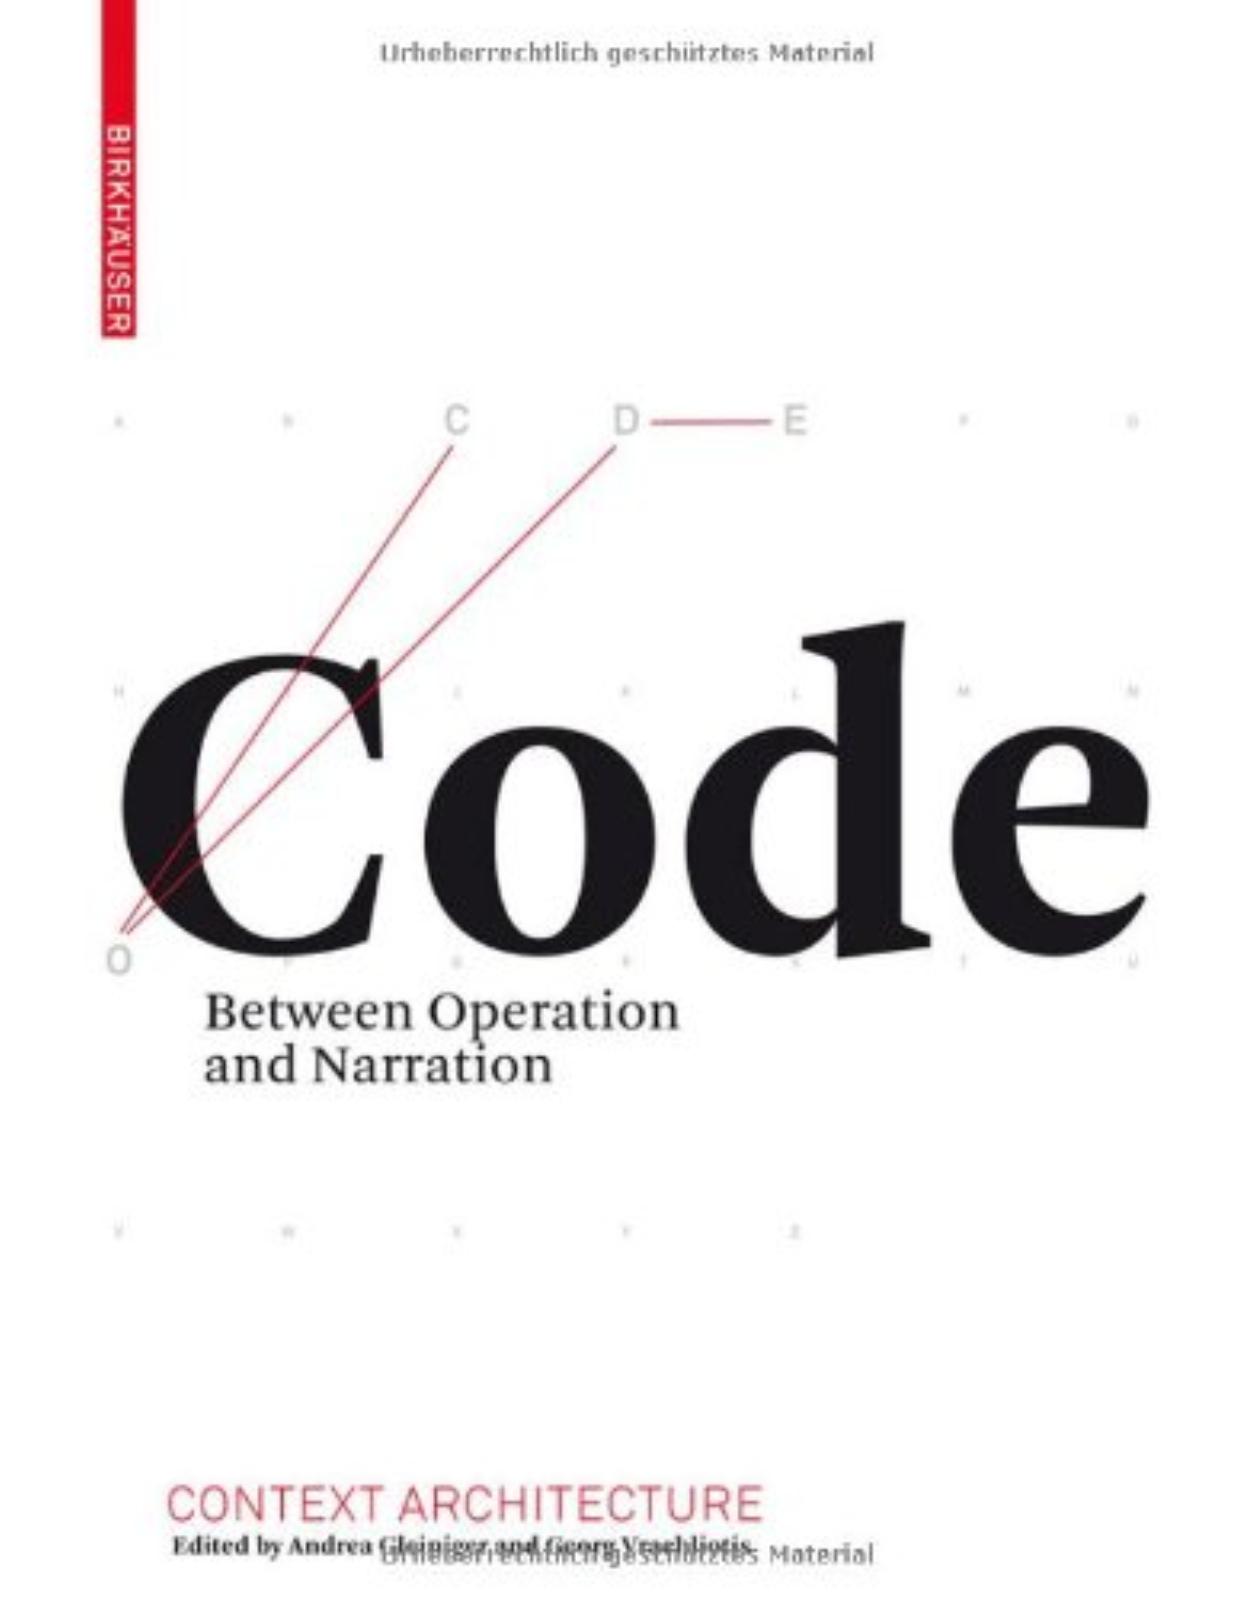 Code: Between Operation and Narration. CONTEXT - Context Architecture